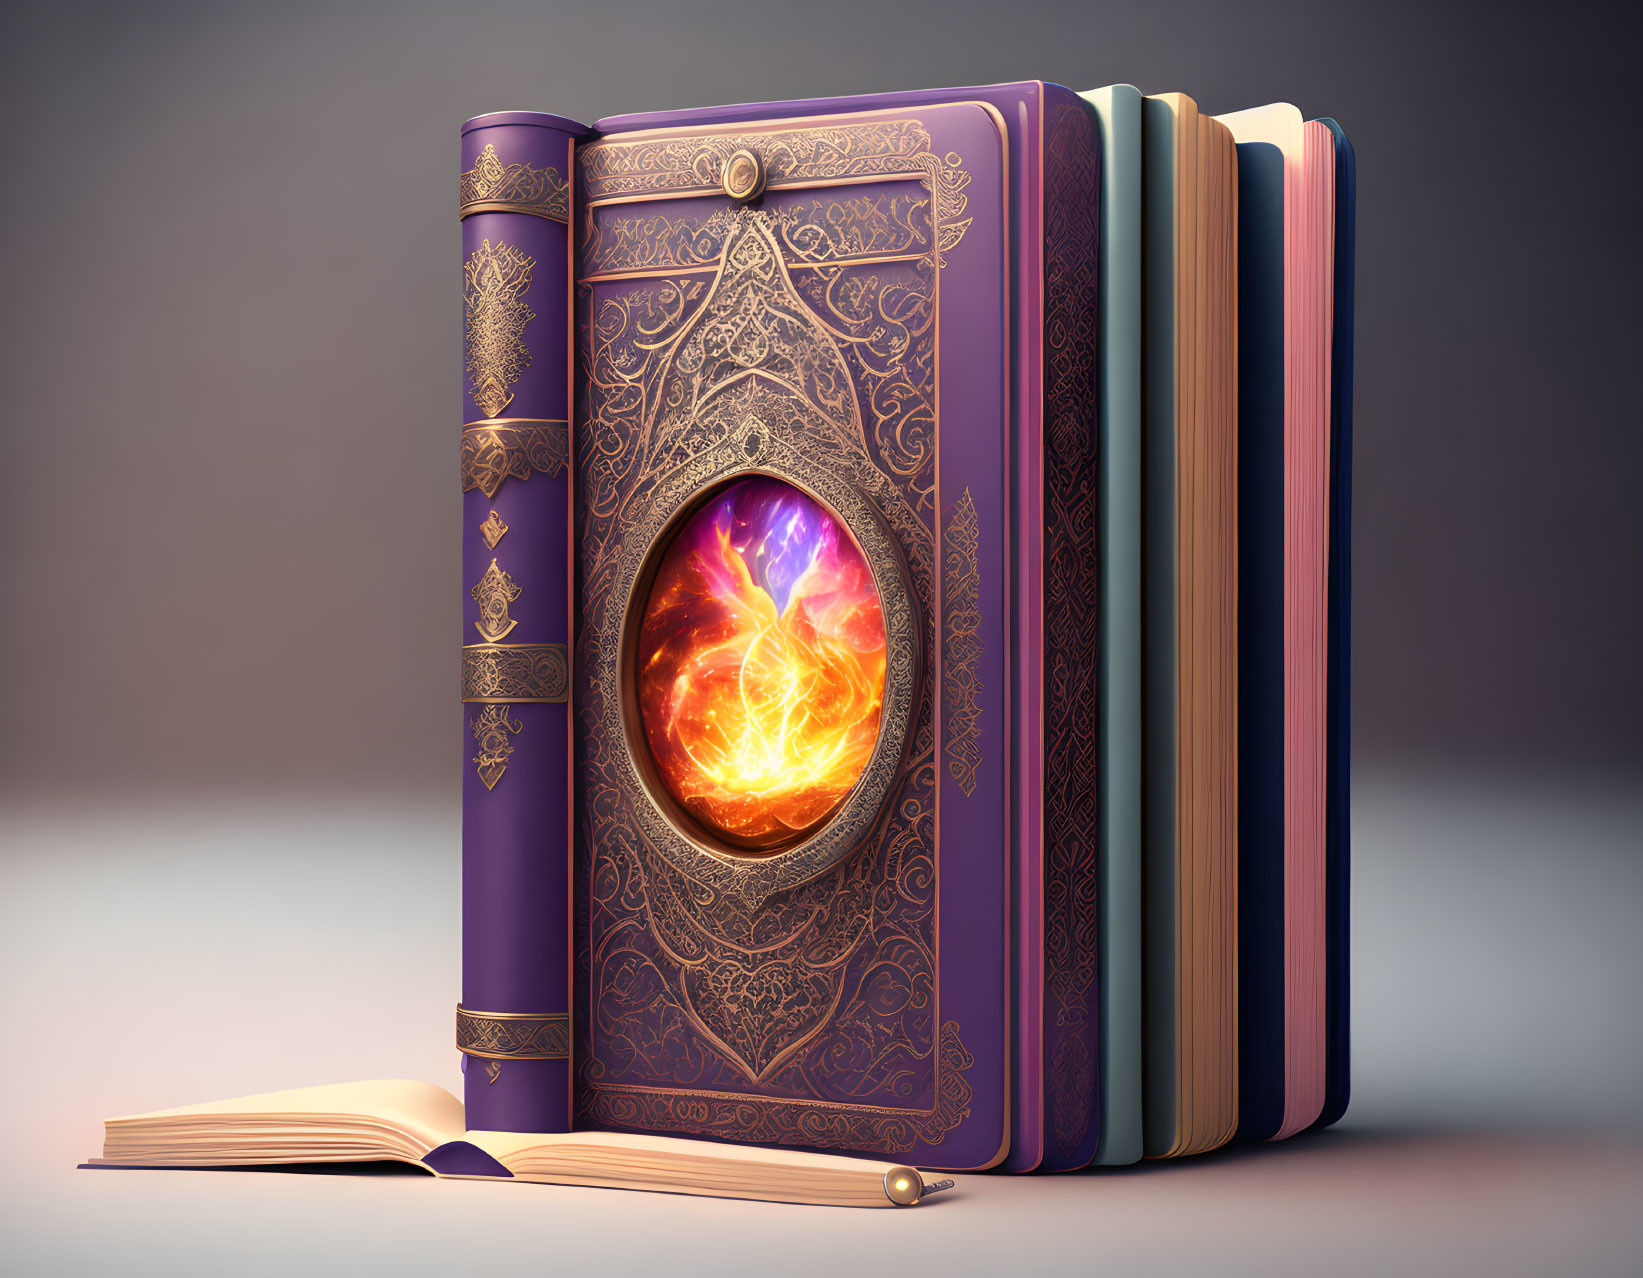 Ornate purple book with fiery orb and golden designs